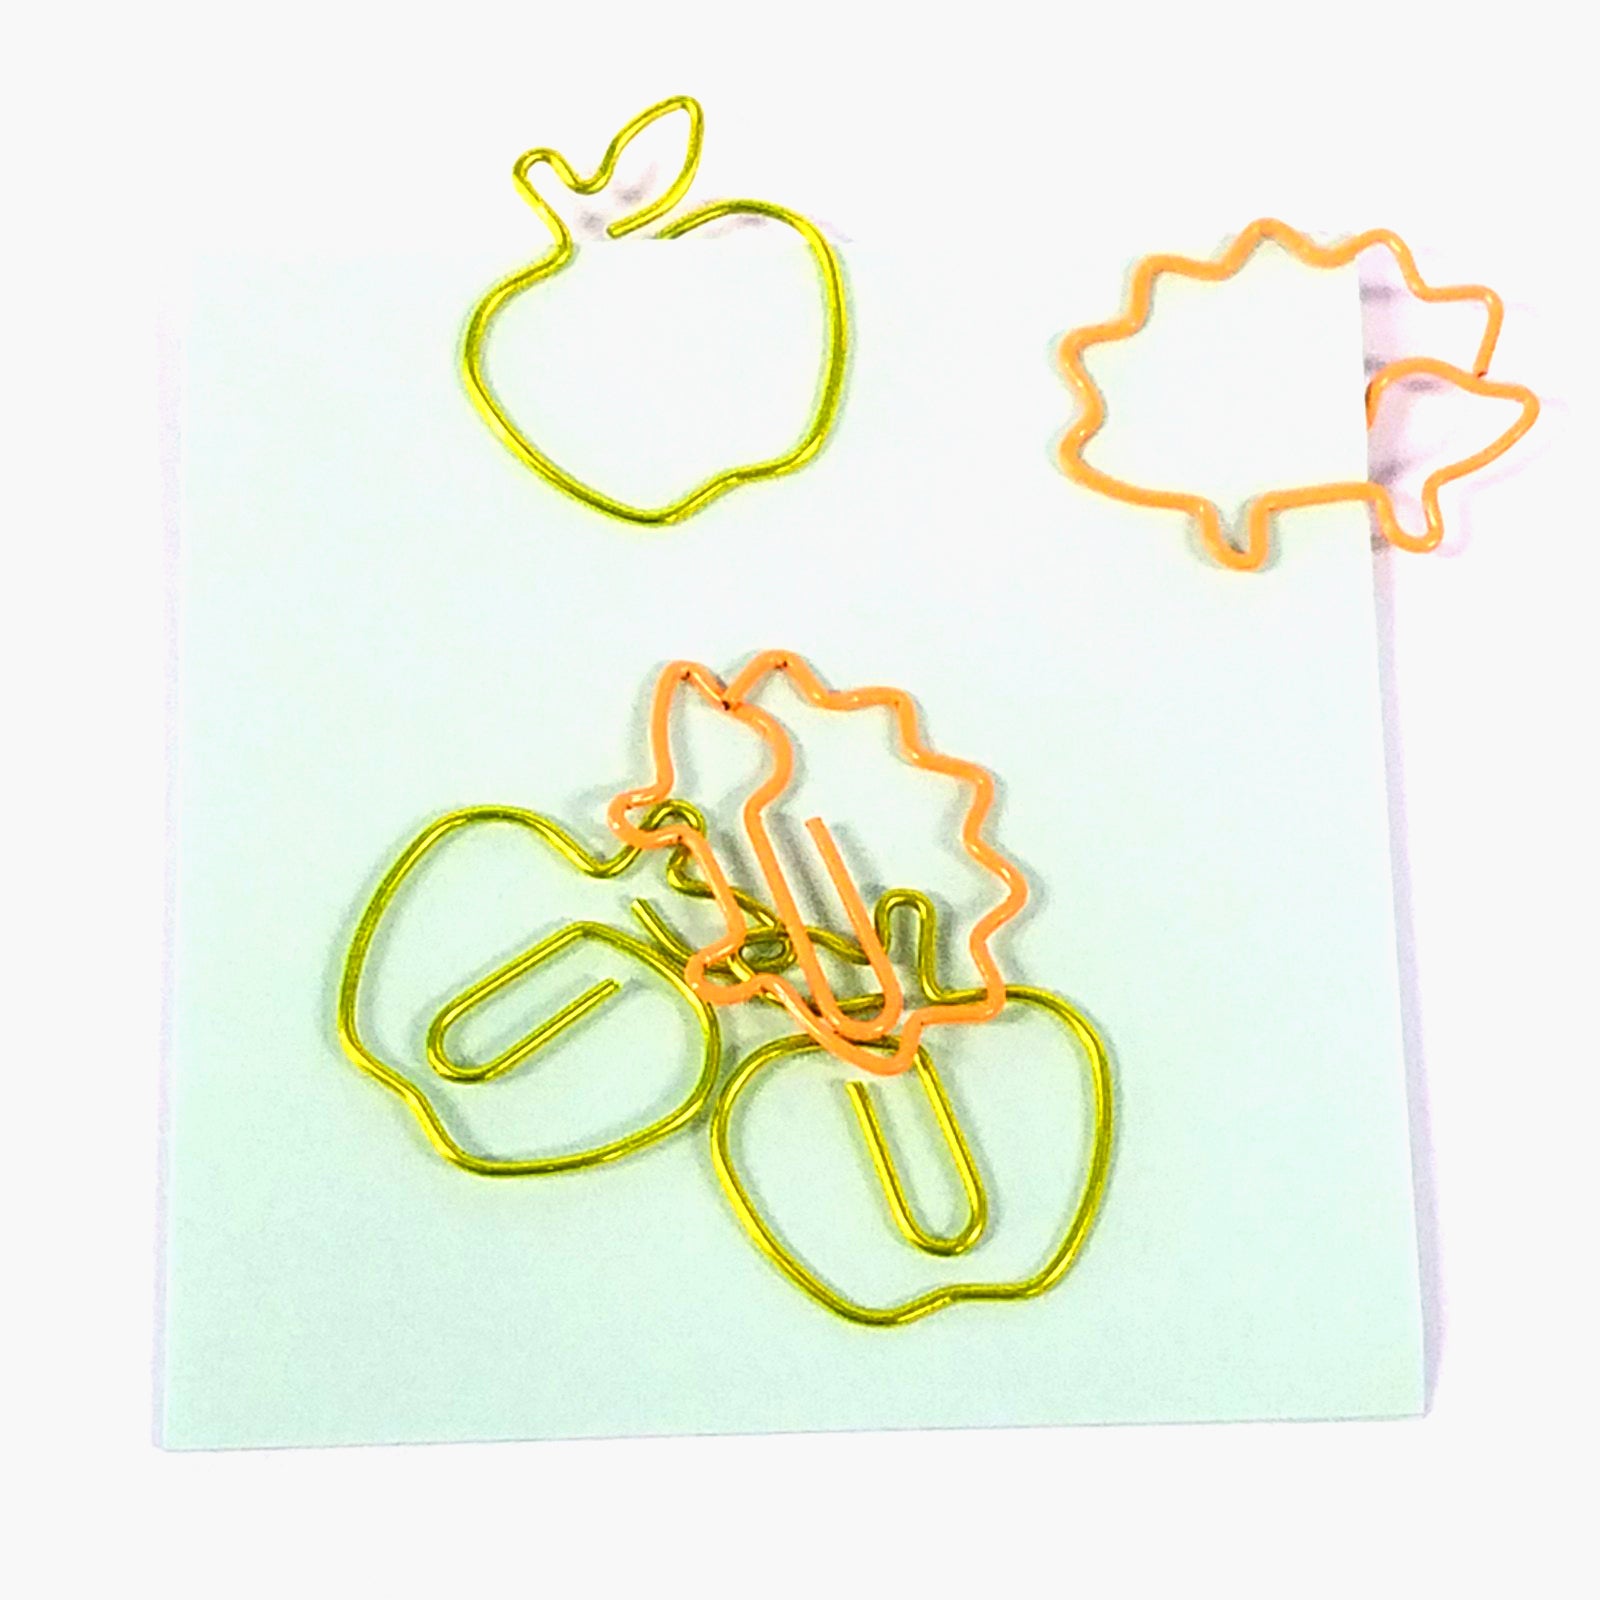 Forest Paper Clips